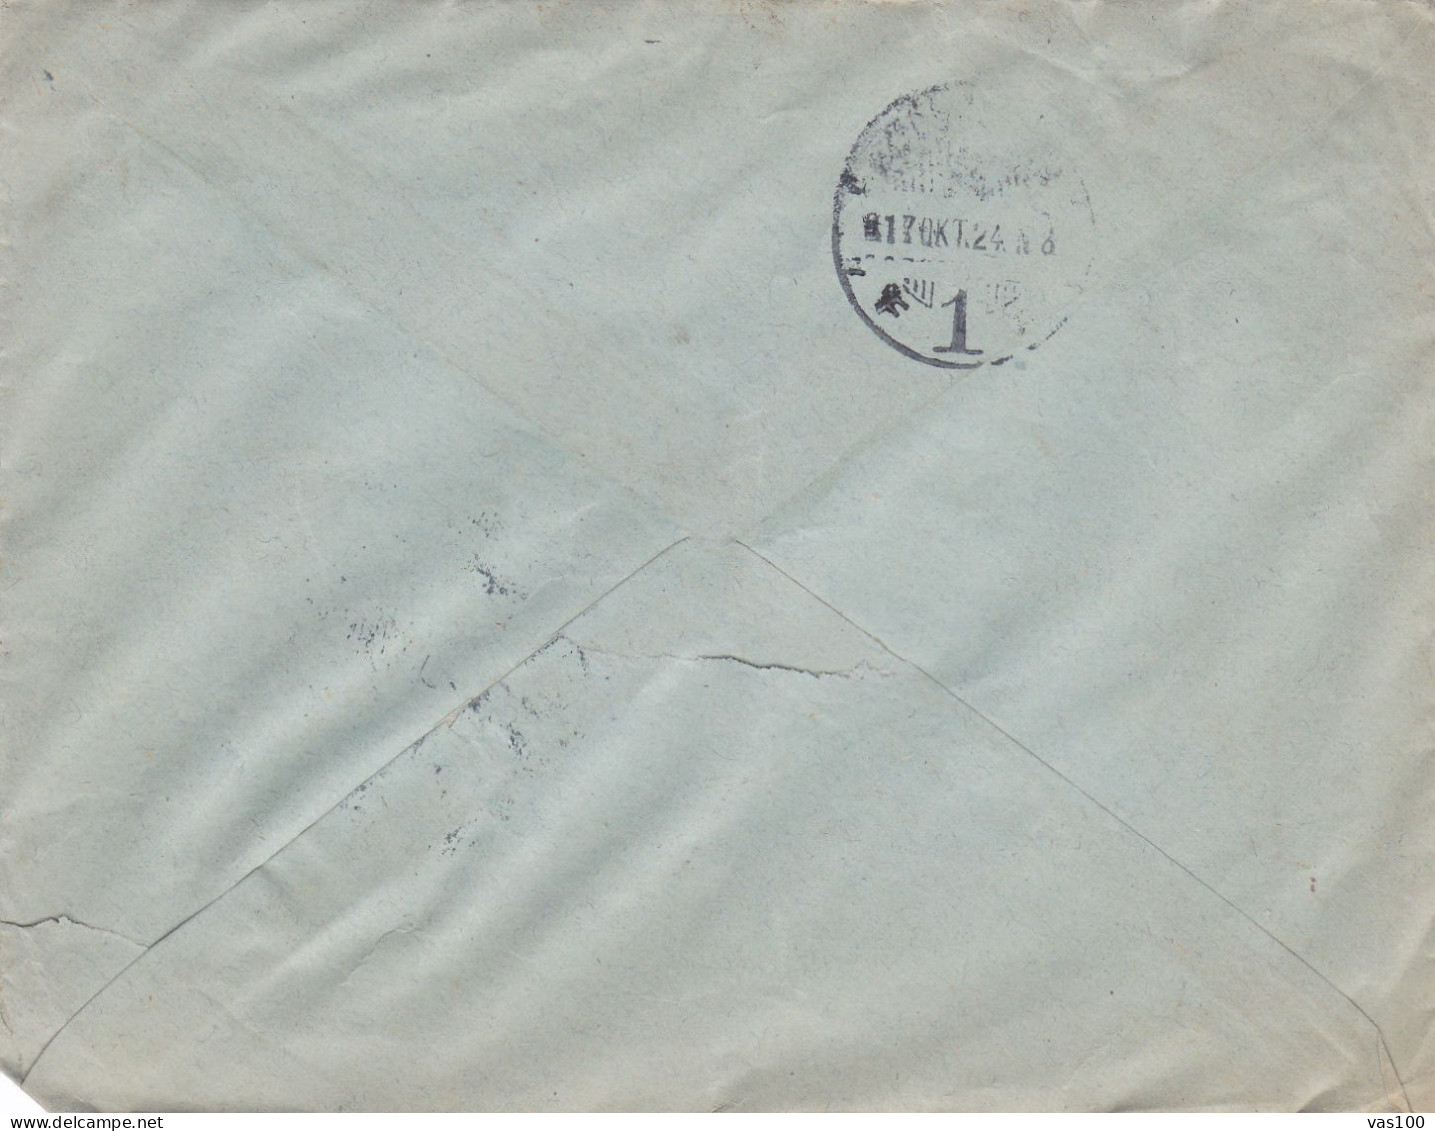 GRAINS HARVESTERS STAMPS ON  COVER/15 FILER 1917,HUNGARY - Covers & Documents